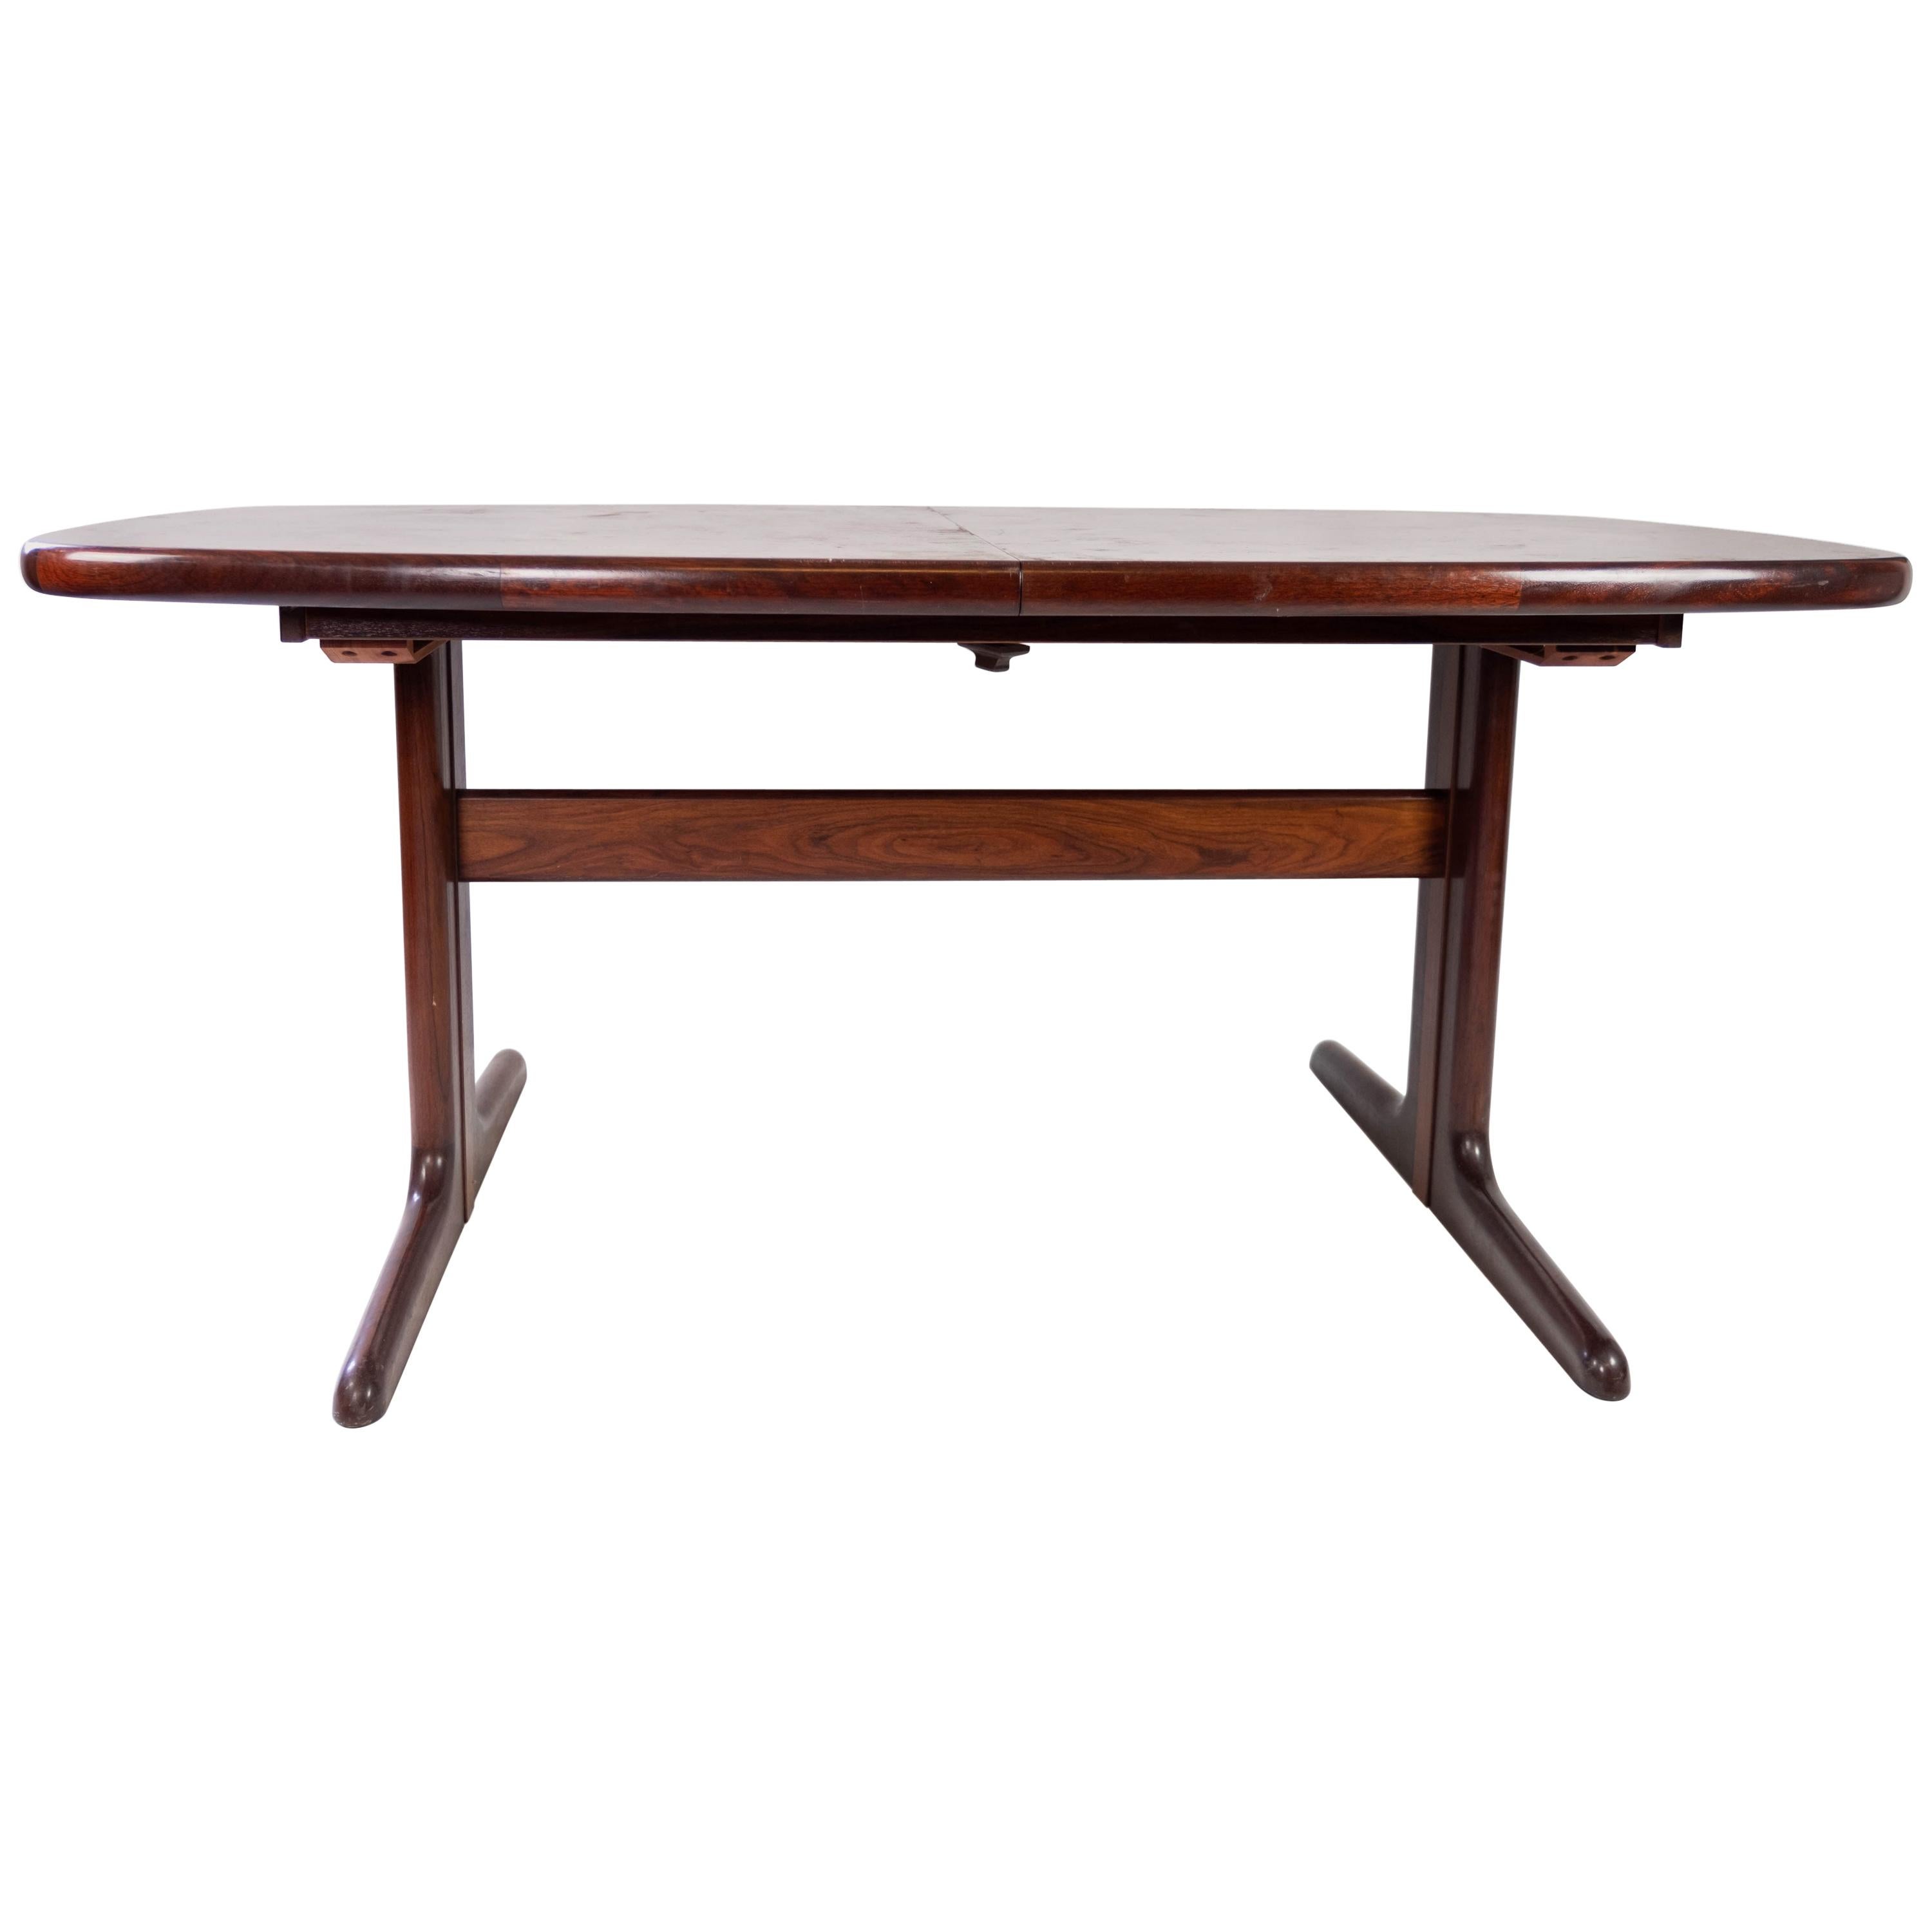 Dining Table with Extensions in Rosewood of Danish Design Manufactured by Skovby